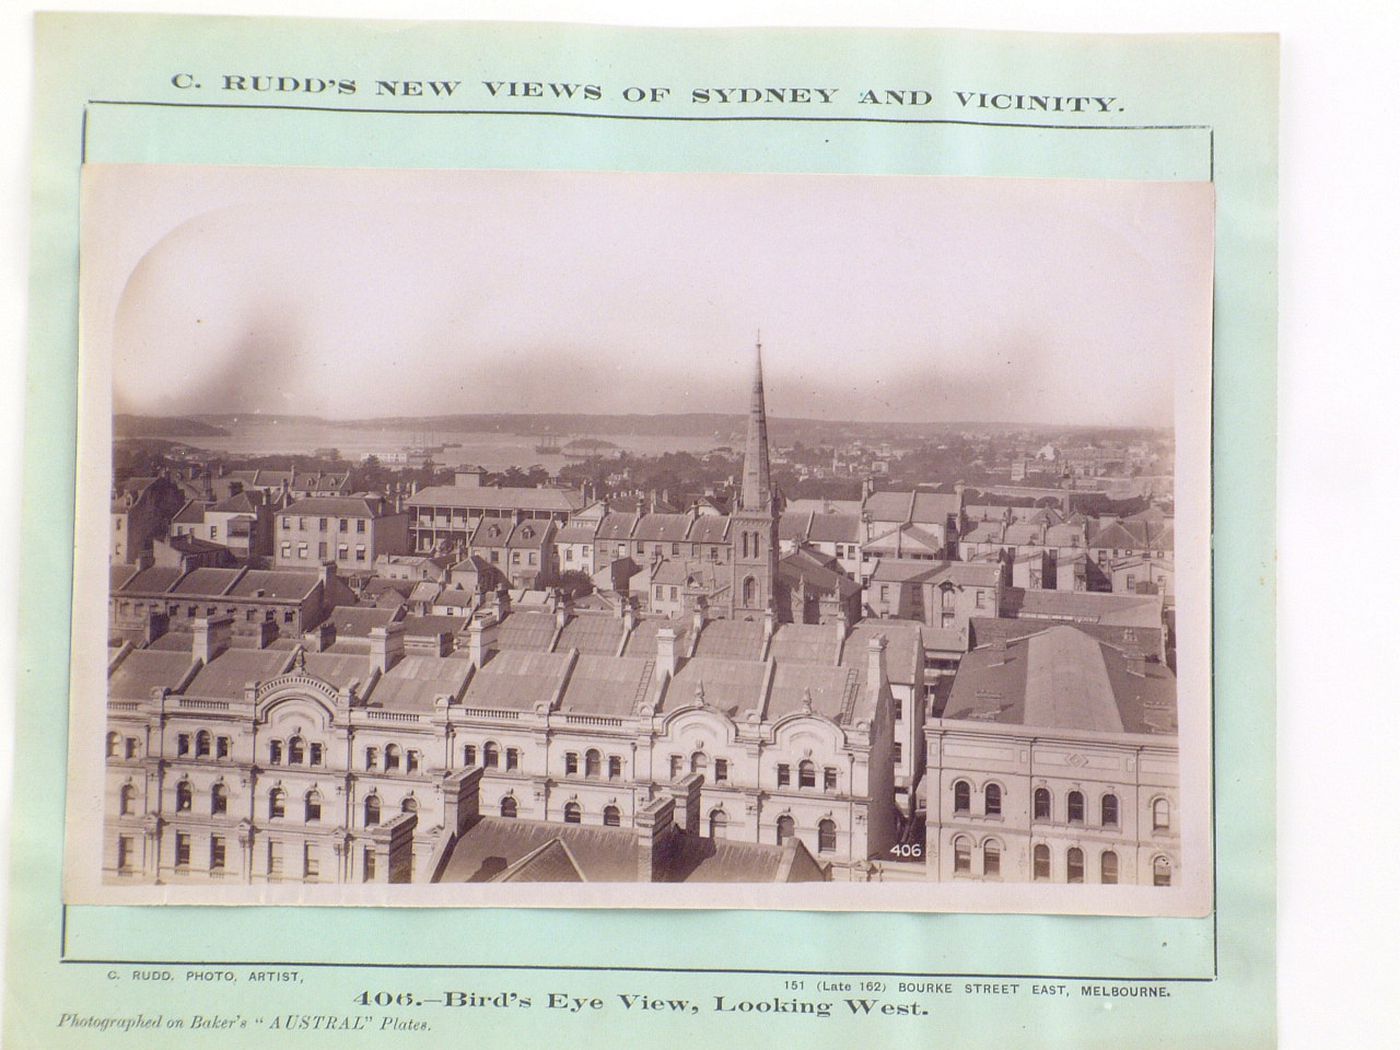 View of Sydney showing row houses and a church steeple, Australia